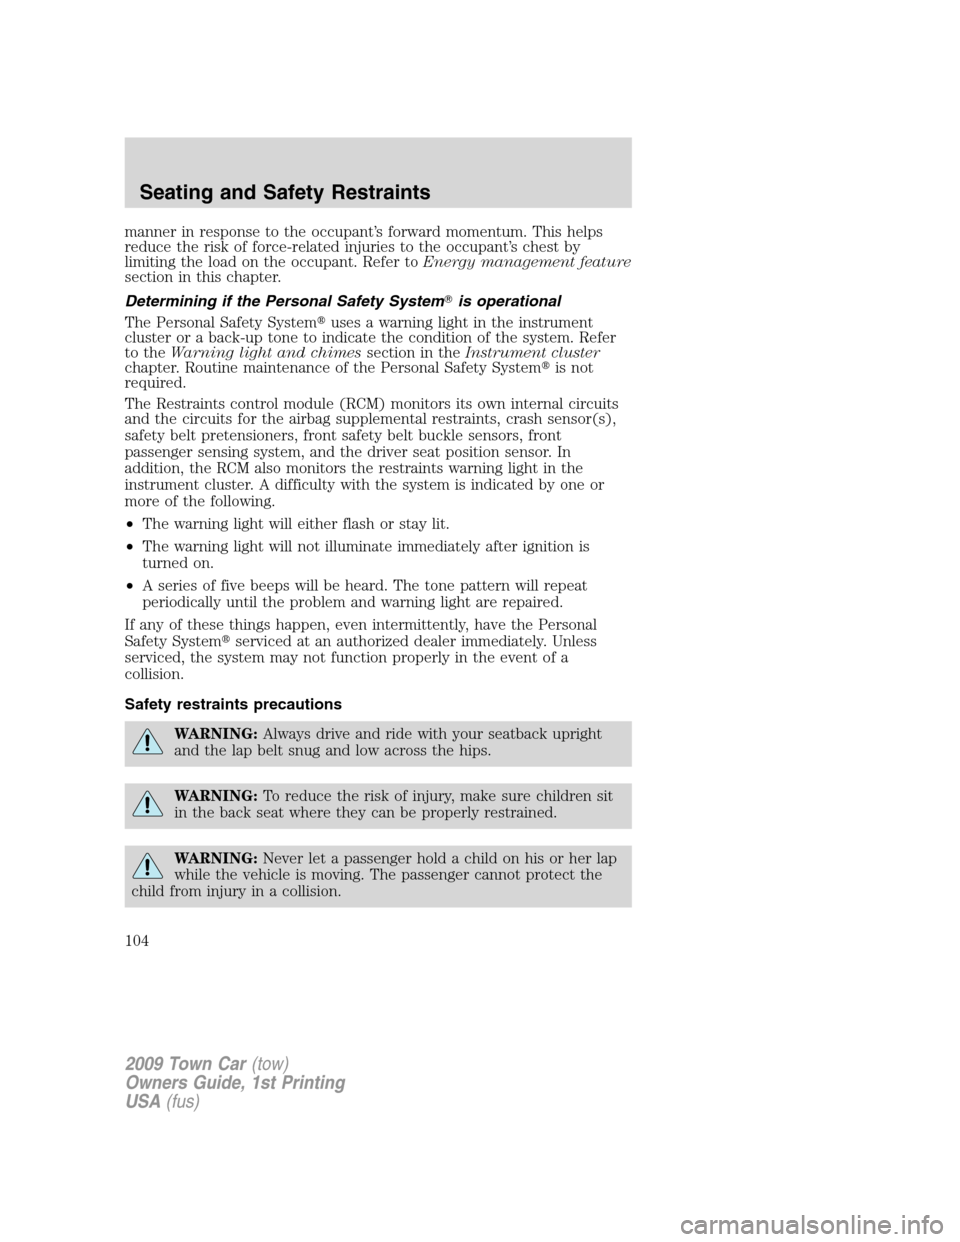 LINCOLN TOWN CAR 2009 Service Manual manner in response to the occupant’s forward momentum. This helps
reduce the risk of force-related injuries to the occupant’s chest by
limiting the load on the occupant. Refer toEnergy management 